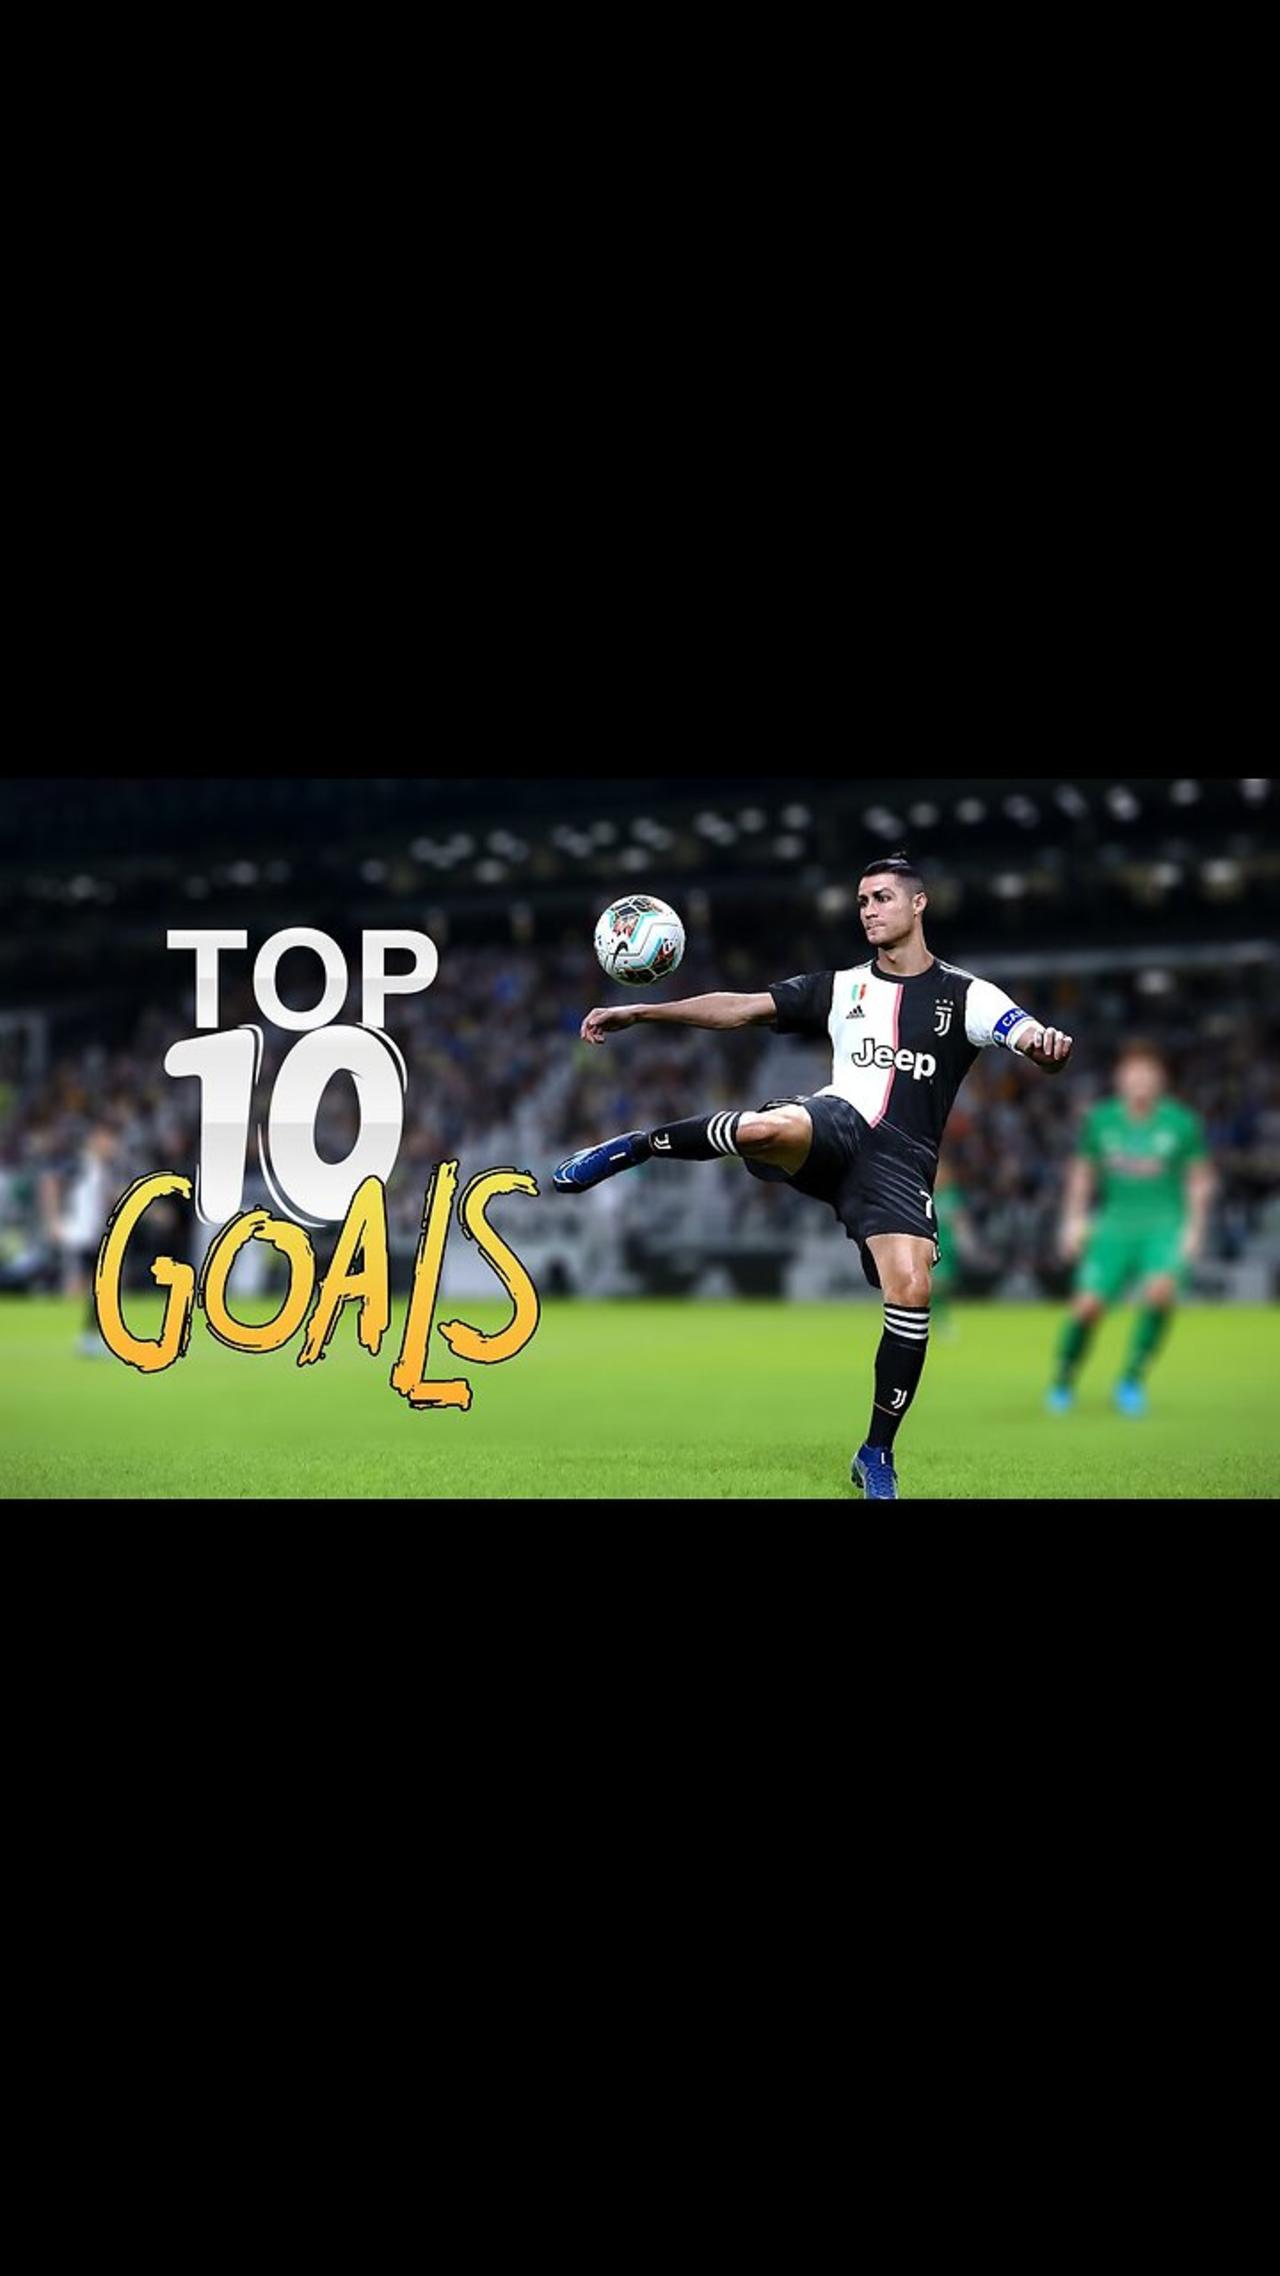 Cristiano Ronaldo 10 most incredible goals in the history of football.